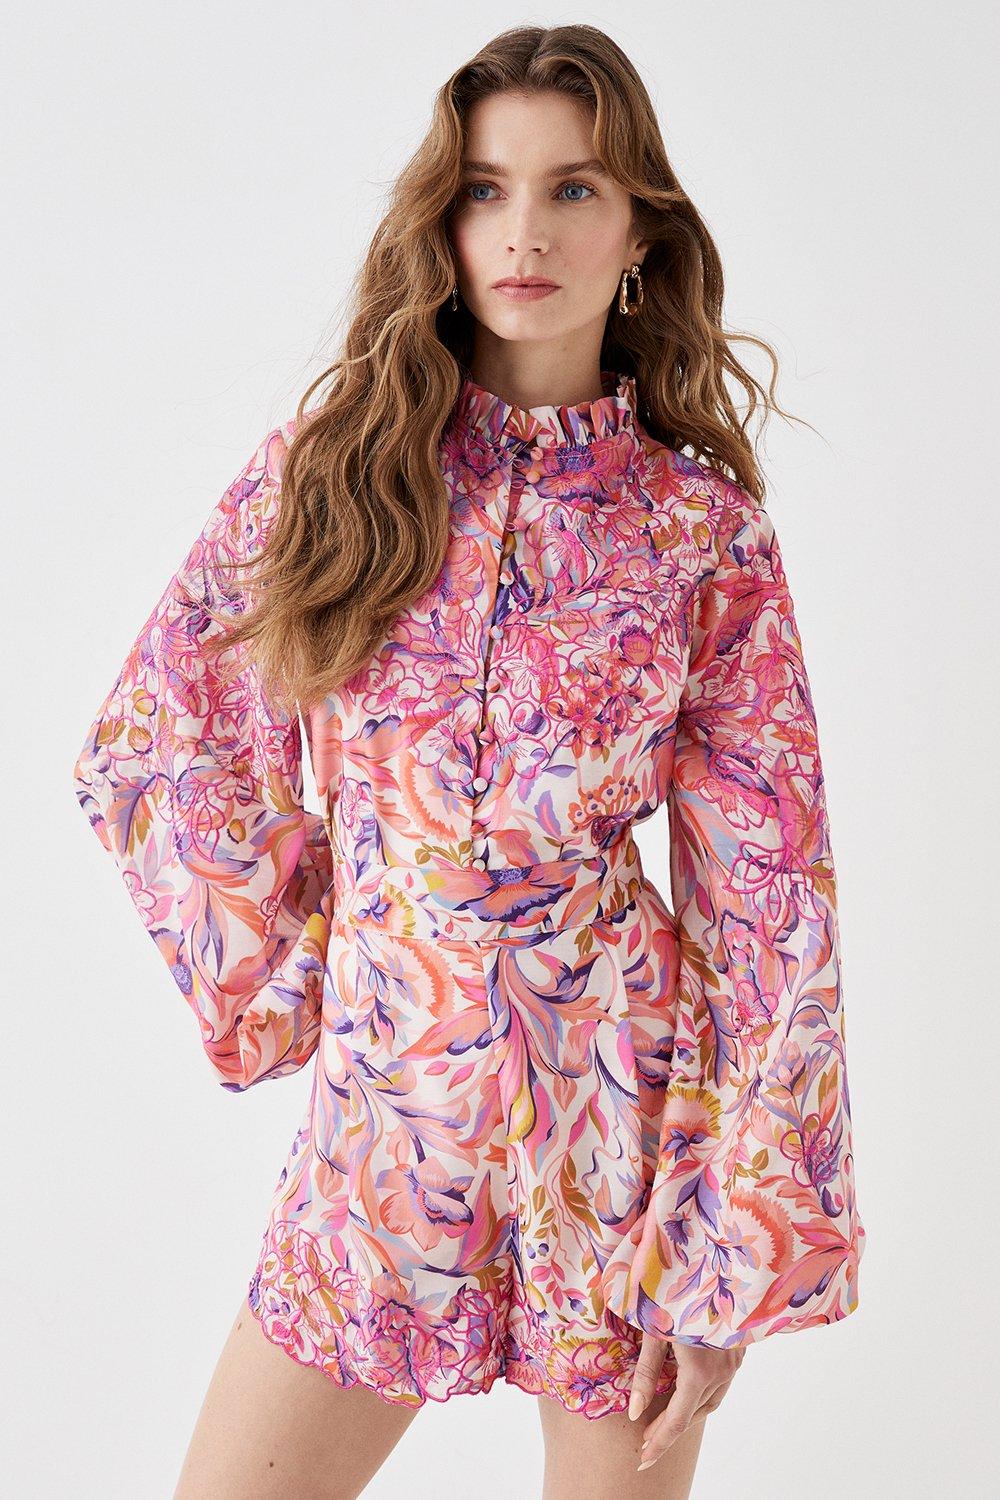 Alexandra Farmer Premium Printed Blouse With Embroidery - Pink